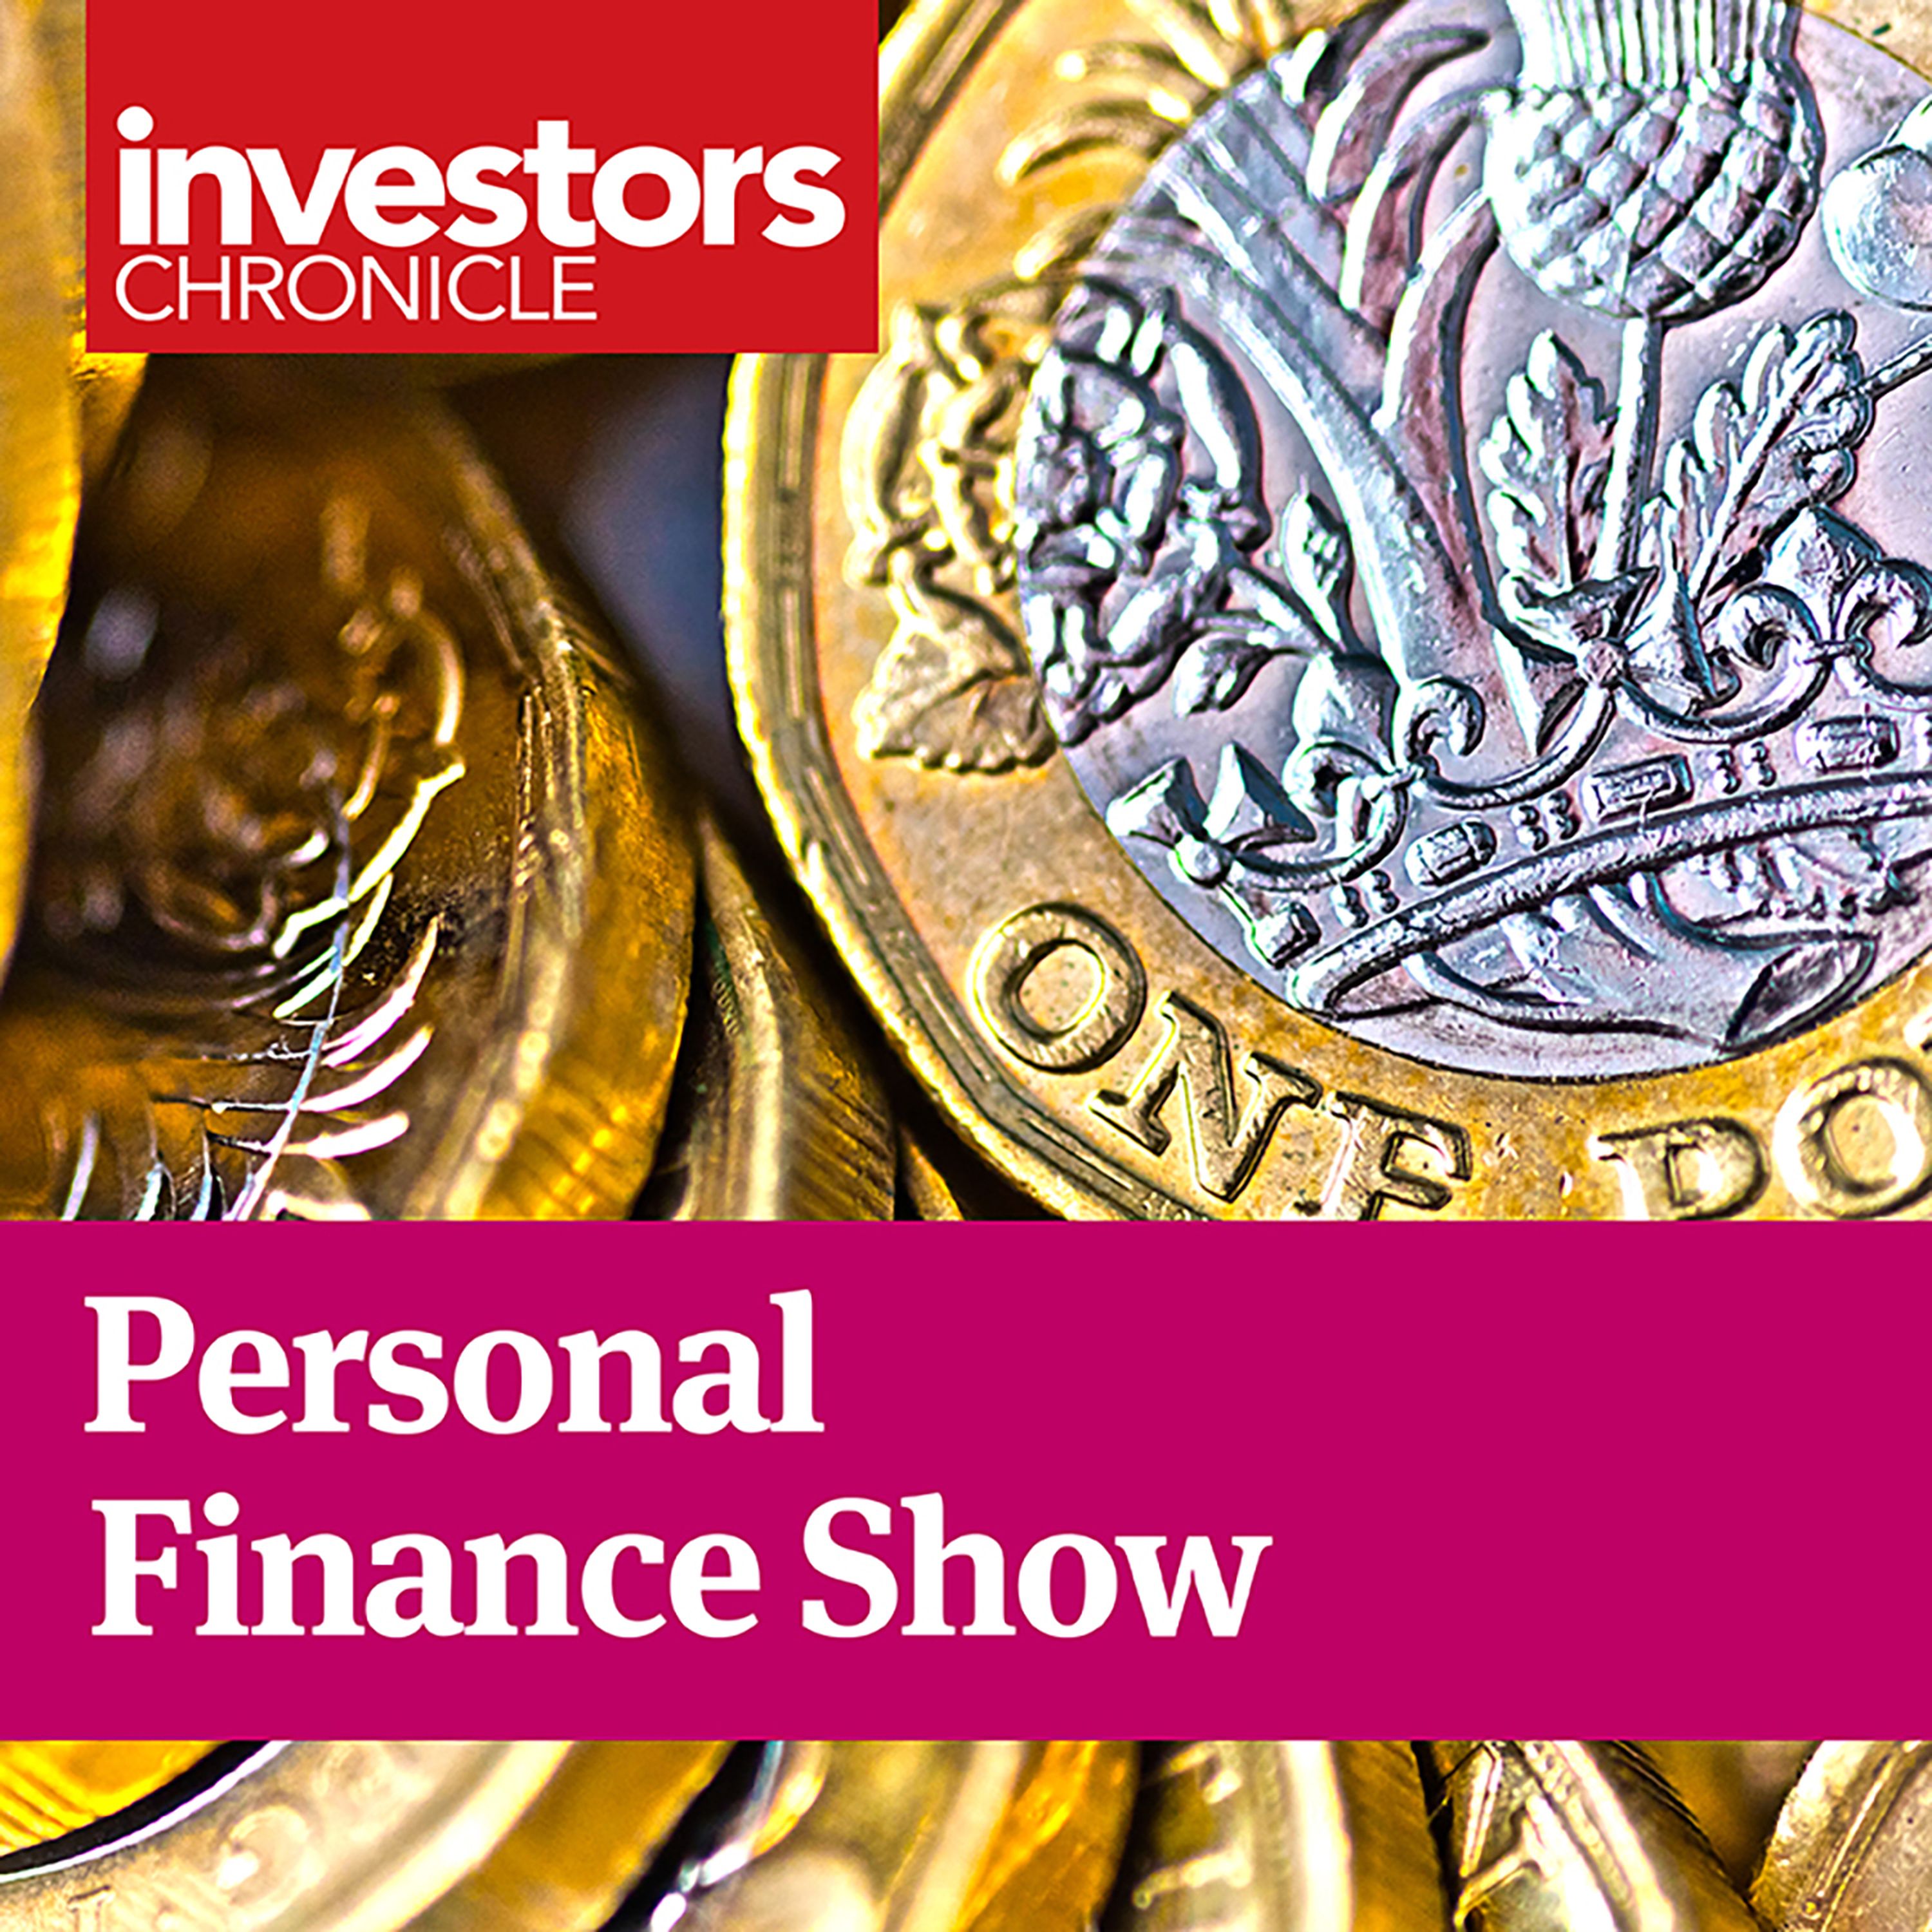 Personal Finance Show: How to manage money through volatility